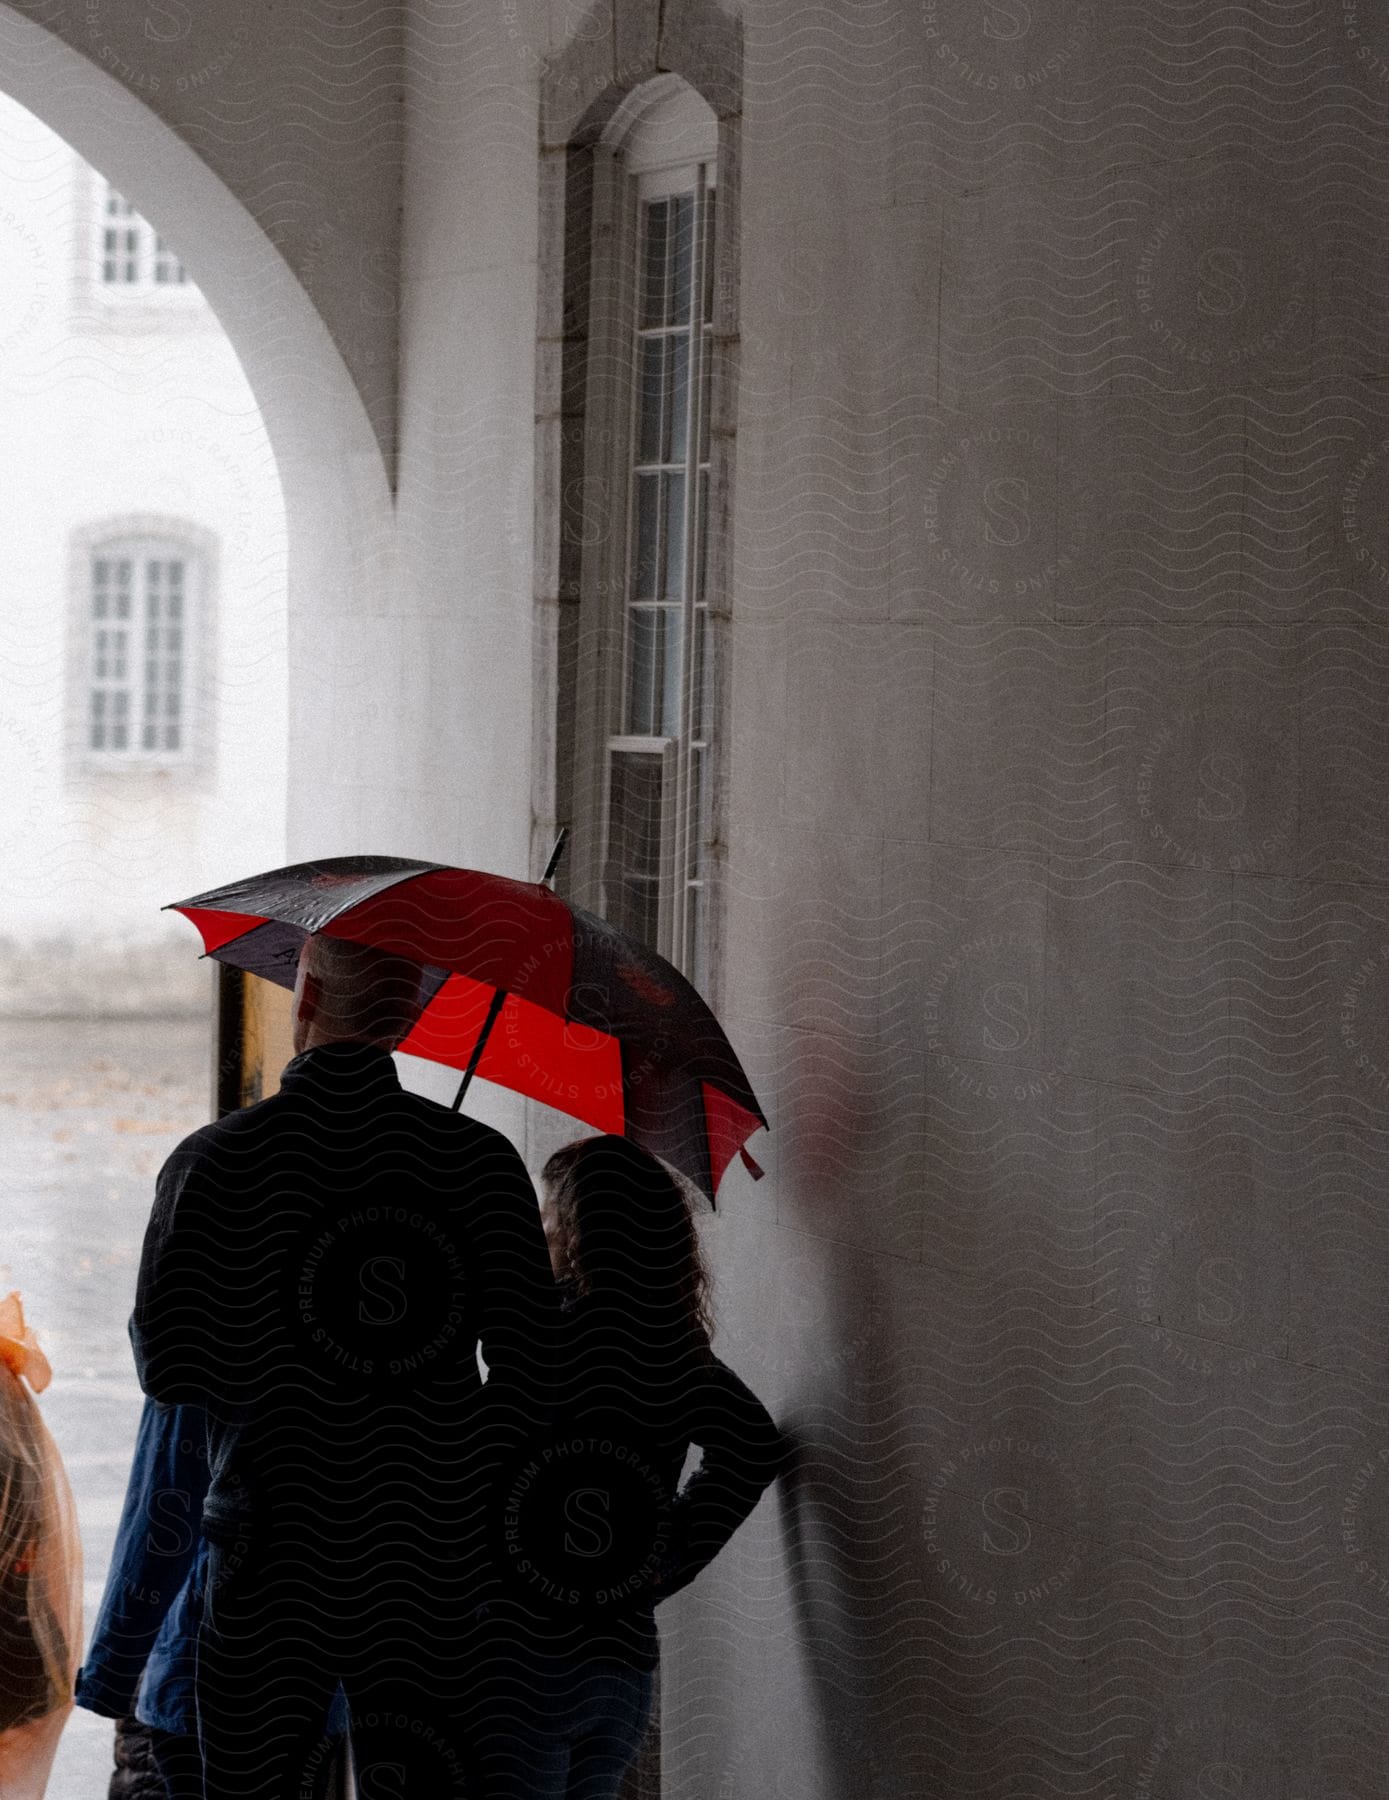 Two people stand under a red umbrella, looking out from an arched corridor during the rainy day.